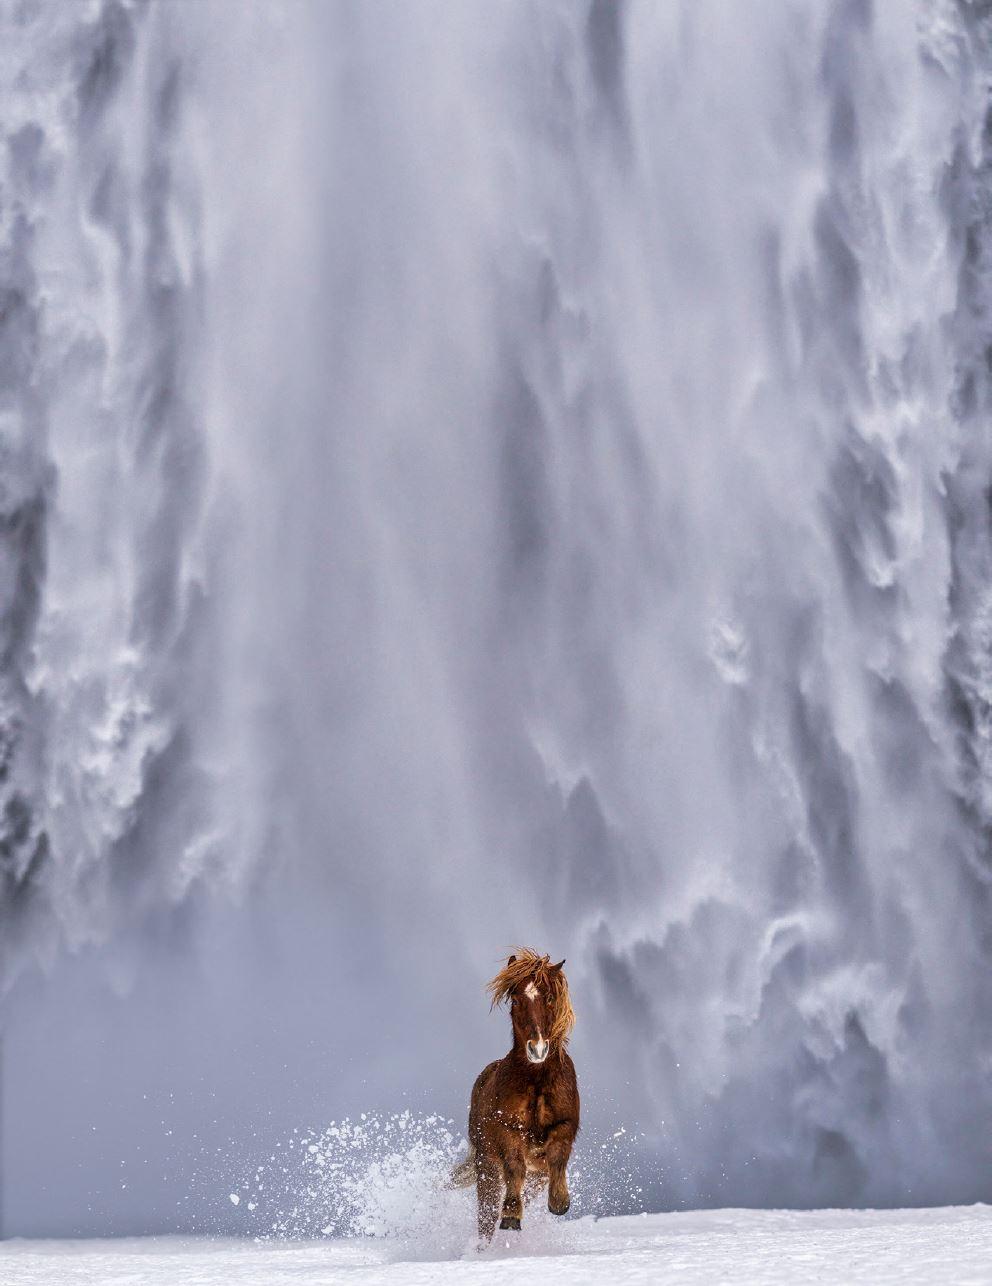 David Yarrow Color Photograph - The Big Chill - Icelandic Horse and Waterfall, fine art photography, 2024